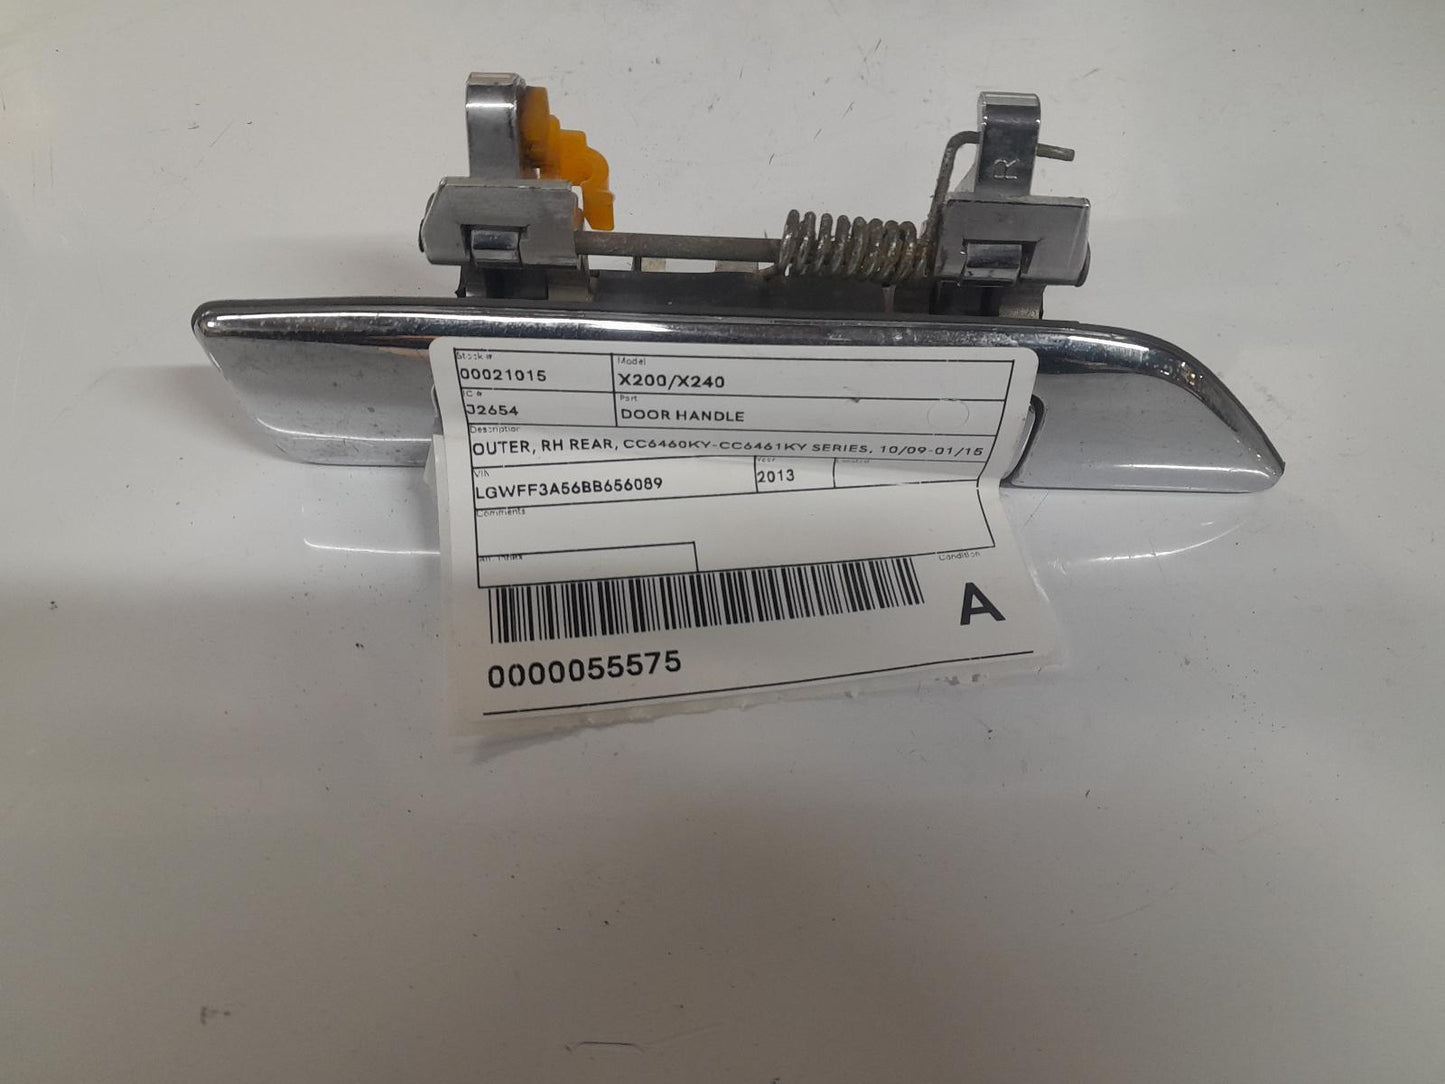 GREAT WALL X200/X240 DOOR HANDLE OUTER, RH REAR, CC6460KY-CC6461KY SERIES, 10/09-01/15